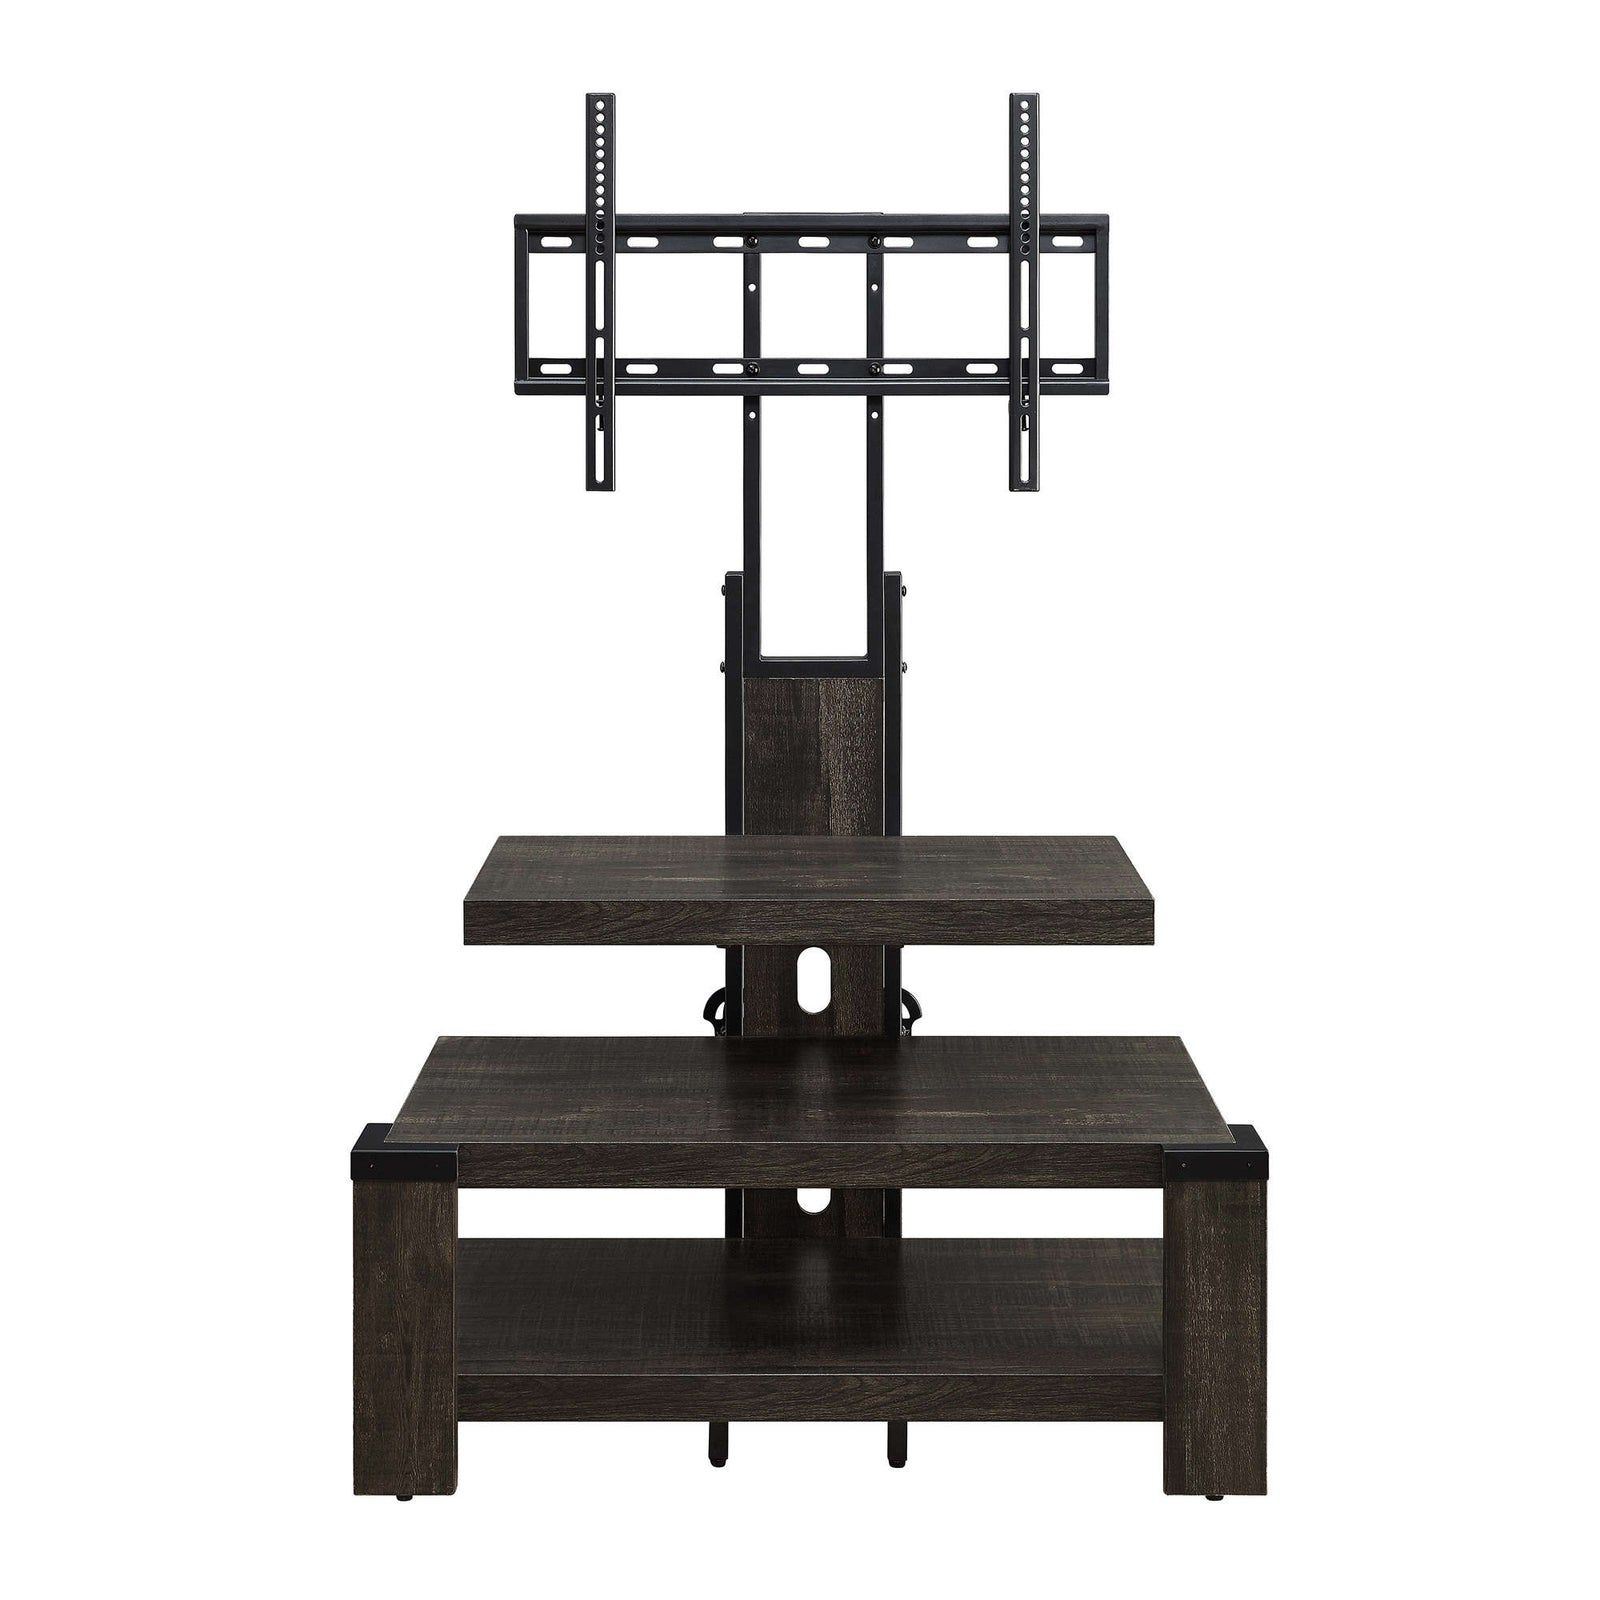 Whalen 3 Shelf Television Stand With Floater Mount For Tvs Up To 55 Regarding Top Shelf Mount Tv Stands (View 19 of 20)